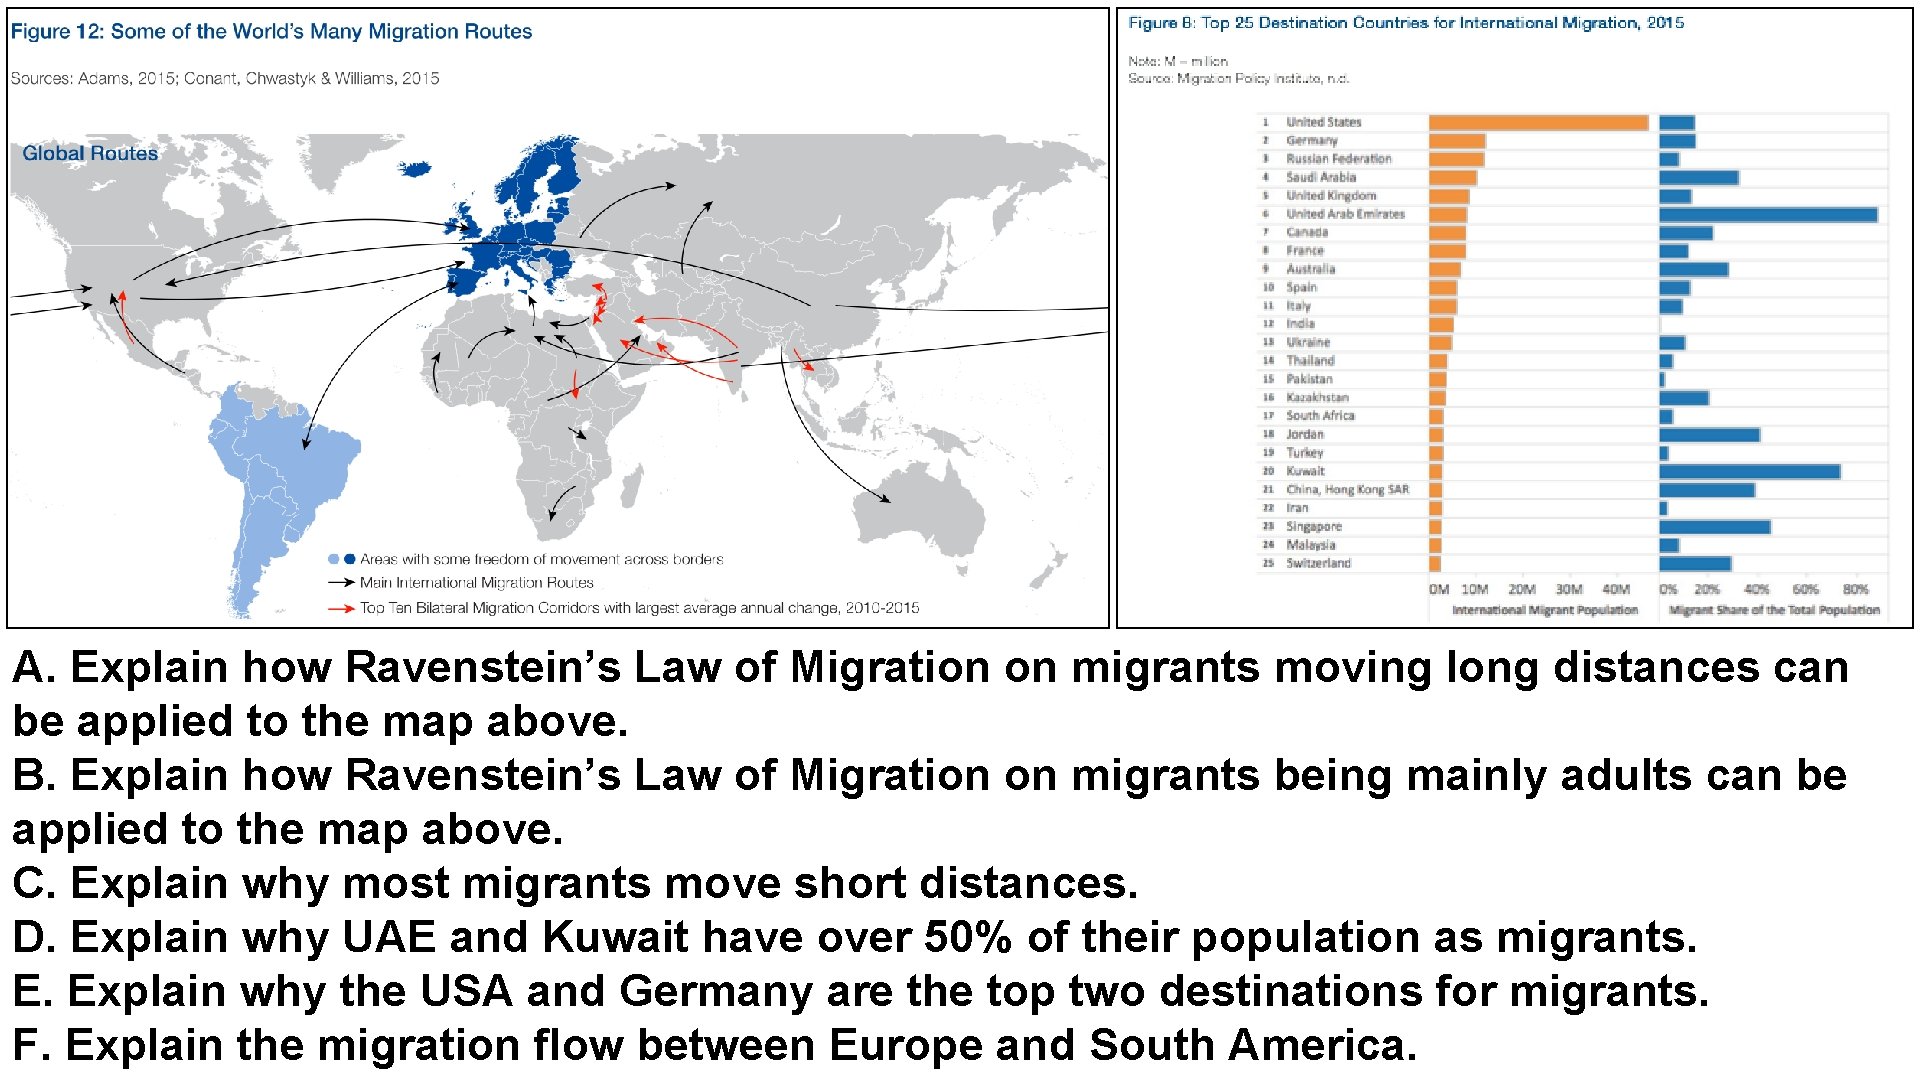 A. Explain how Ravenstein’s Law of Migration on migrants moving long distances can be